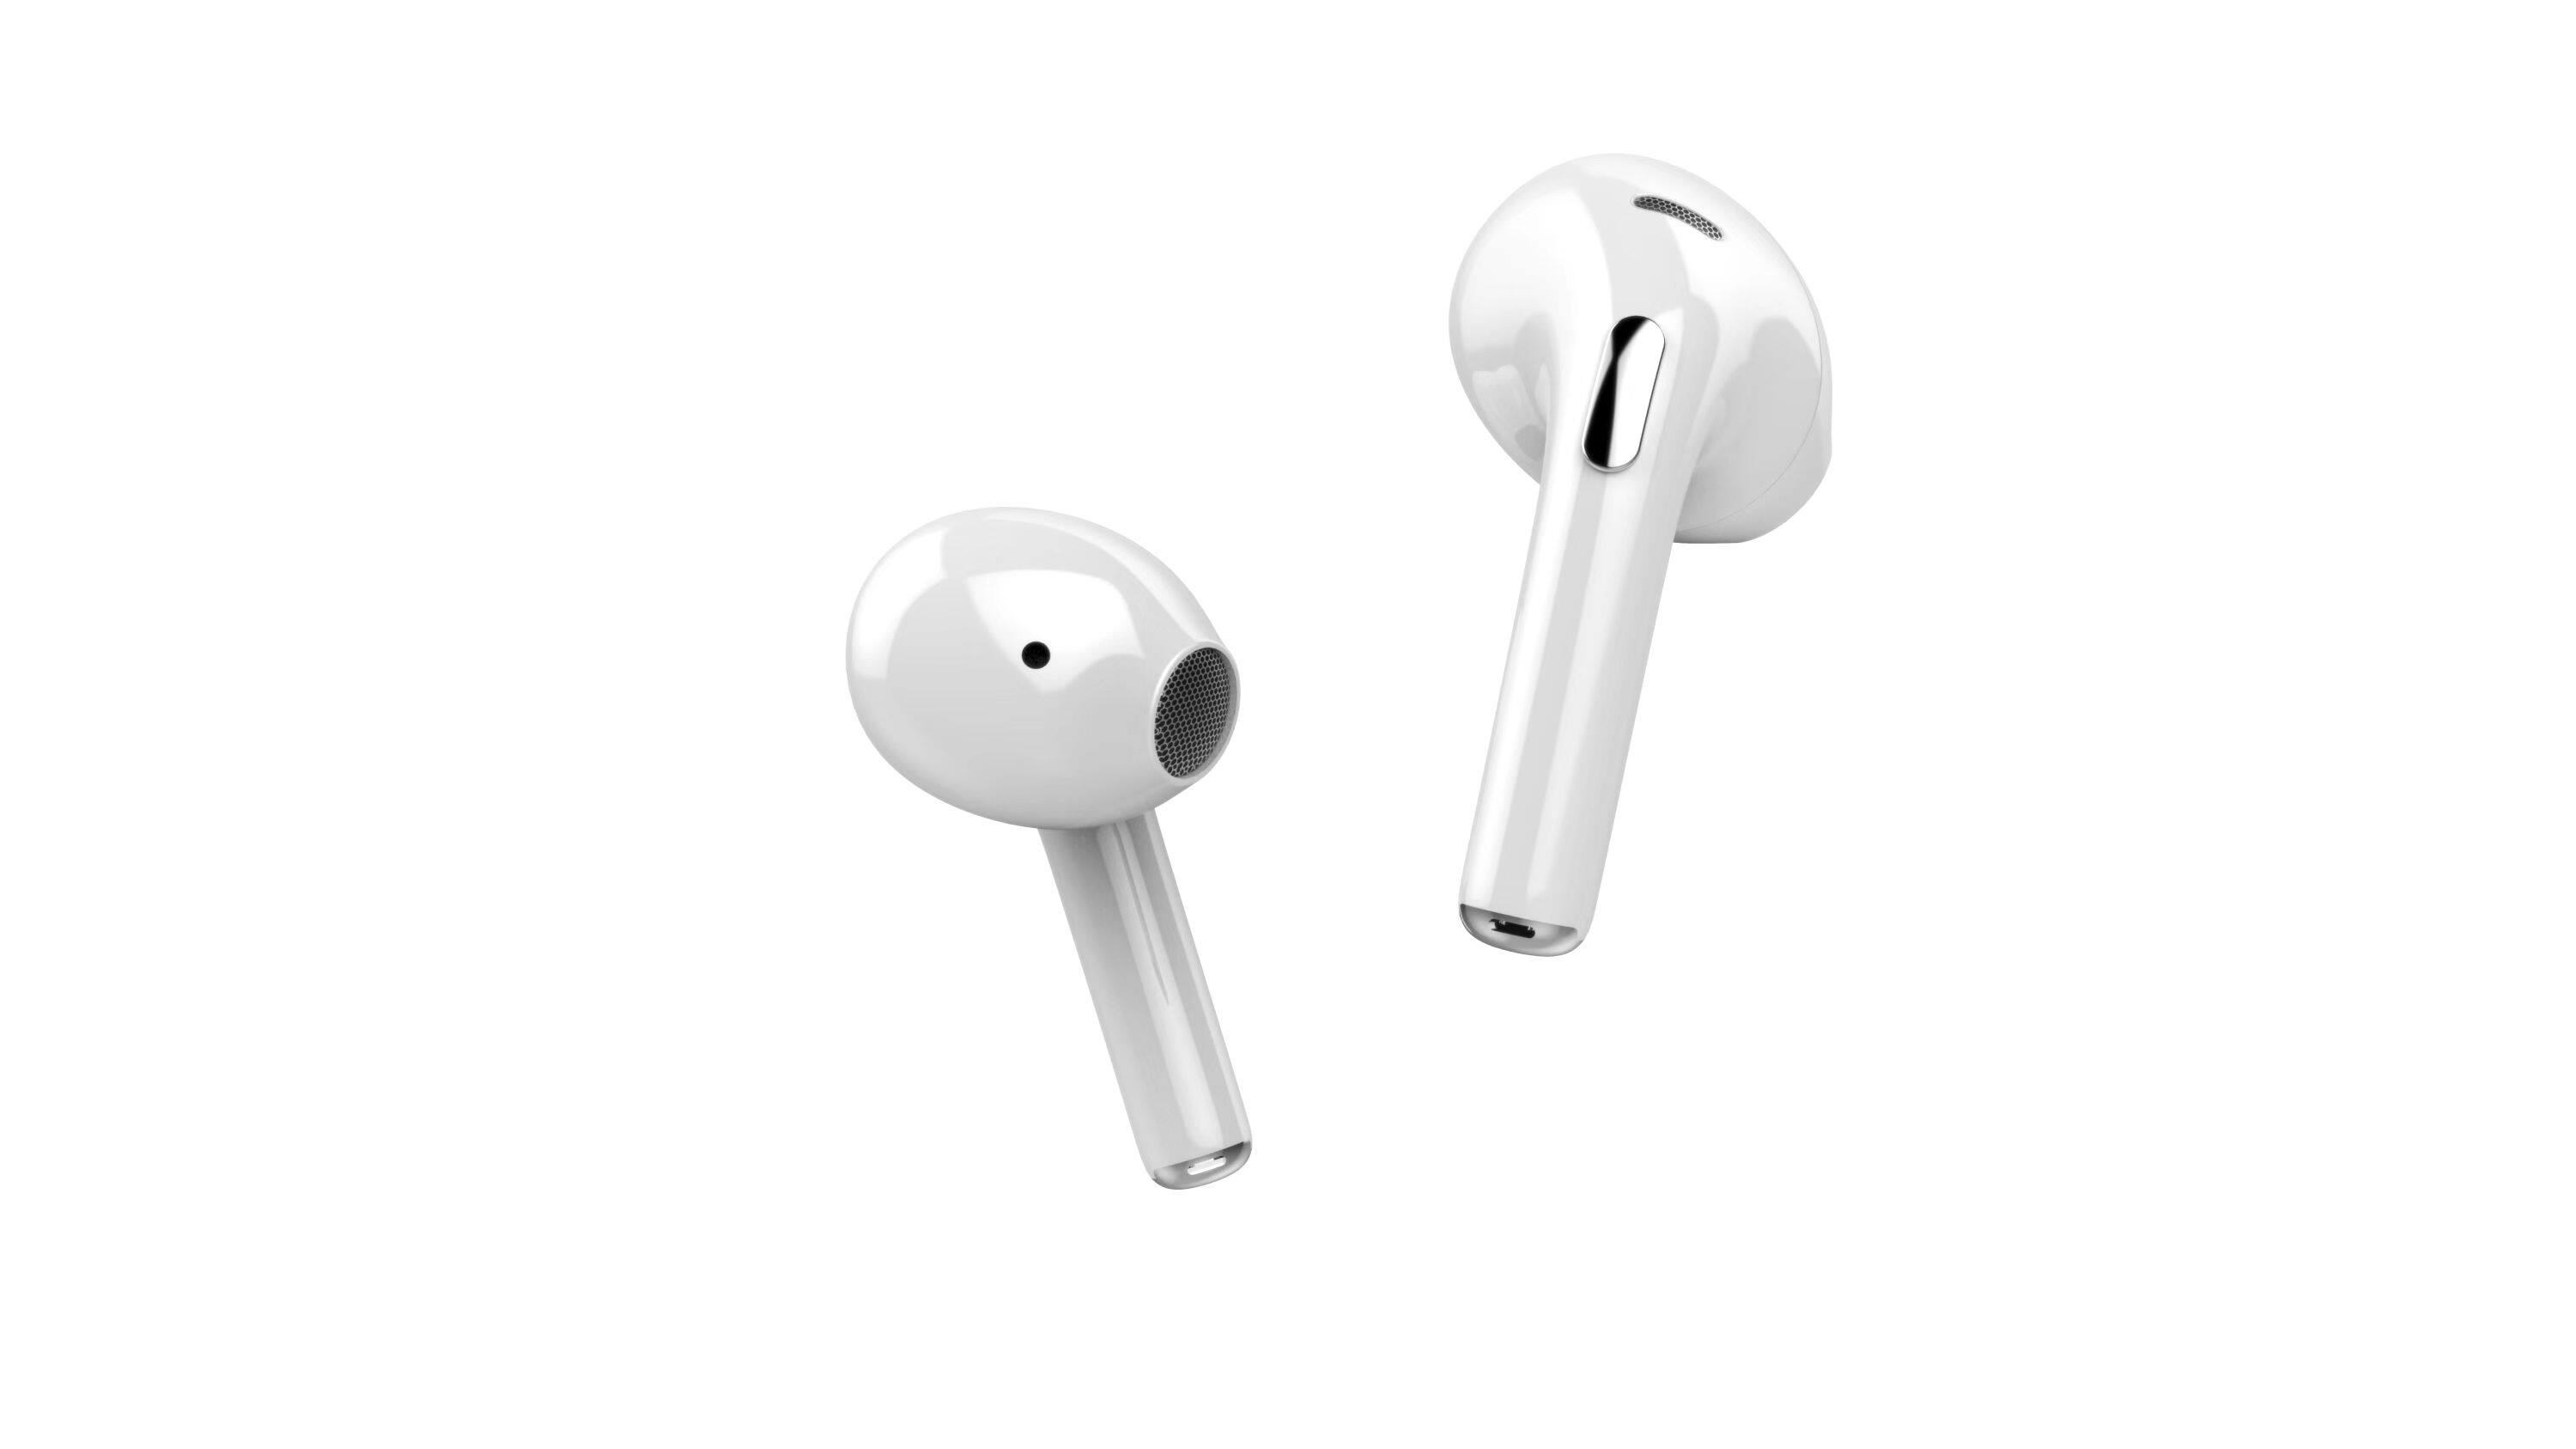 Happyaudio; tws factory; private label tws; china tws factory; OEM Audio Products; Wireless Earbuds Manufacturer; Custom tws manufacturer China; new tws; audio manufacturing; tws model; gaming tws;  budget tws;china electronic manufacturing services;electronics manufacturers in china; wholesale electronics; electronic suppliers in china